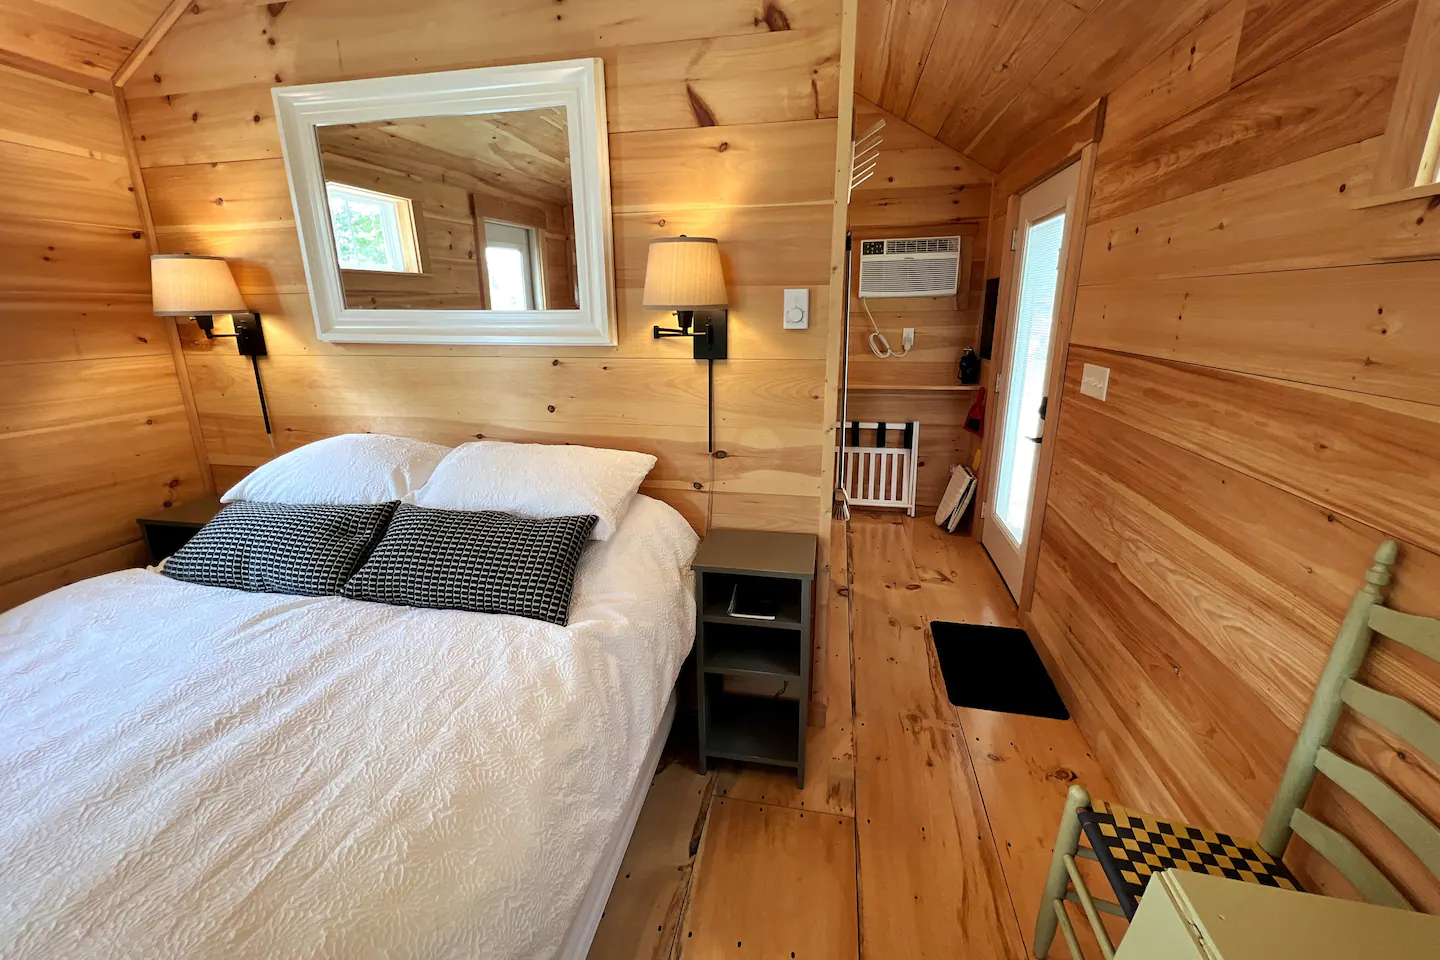 https://steamboatwharfcabins.com/wp-content/uploads/2023/03/2.webp